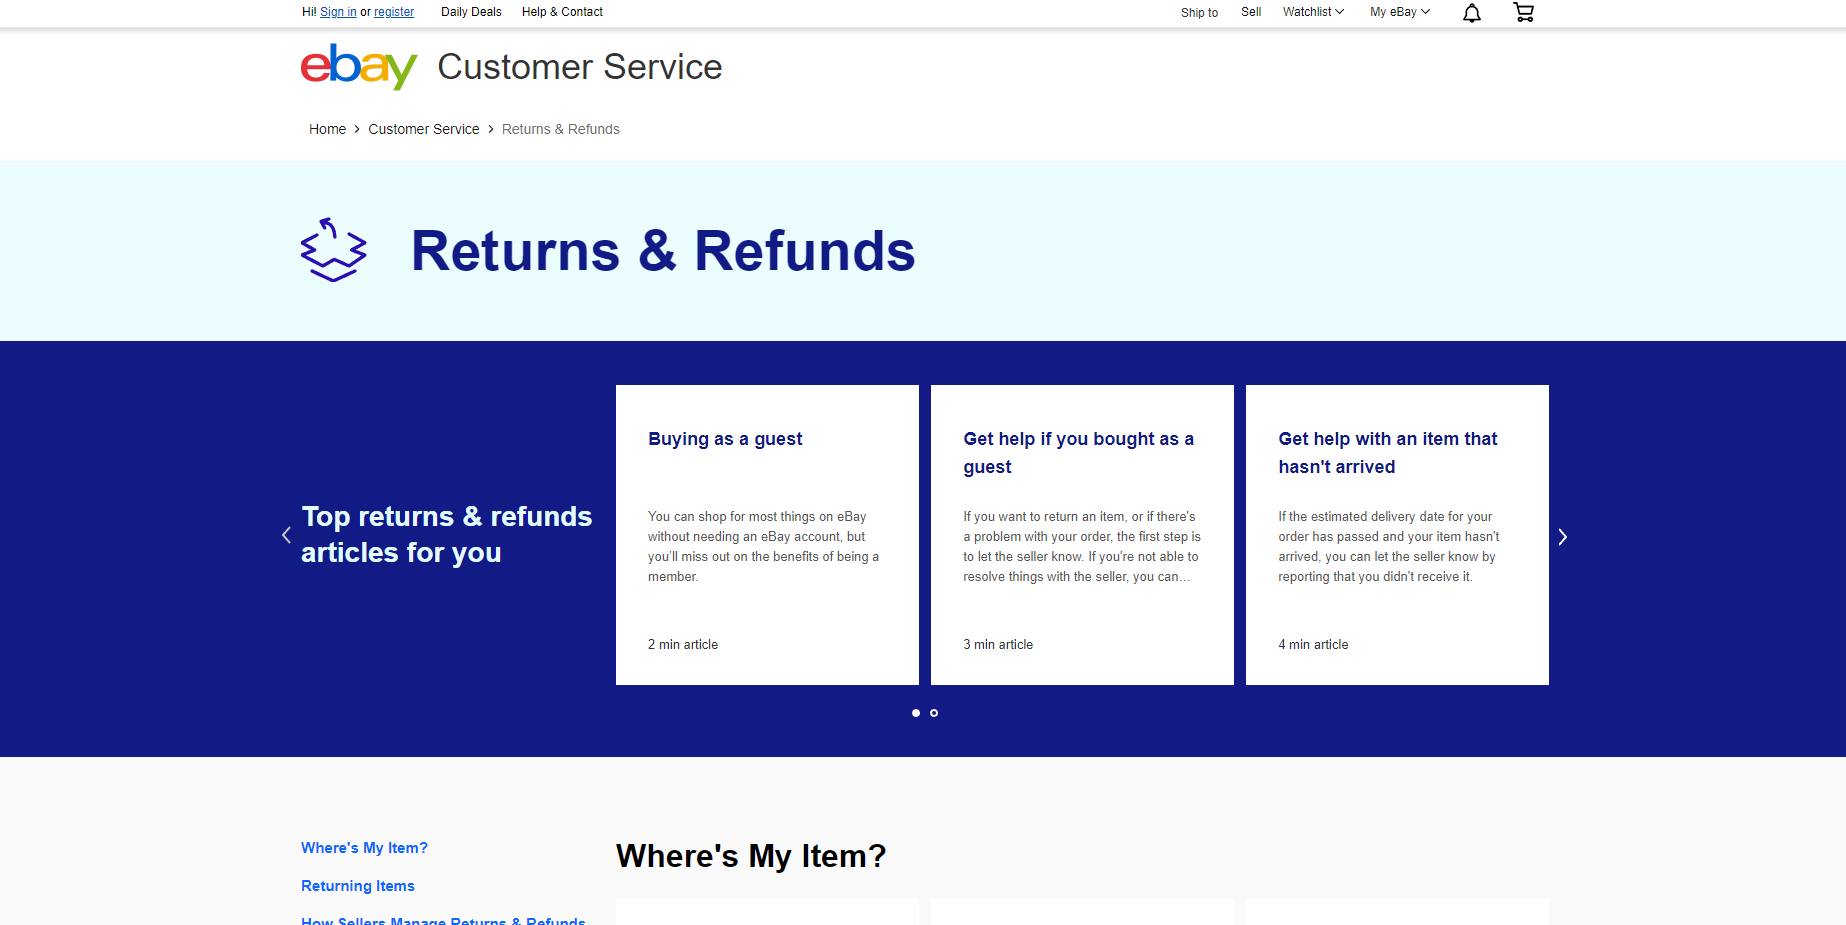 How to manage returns refunds on eBay like a pro